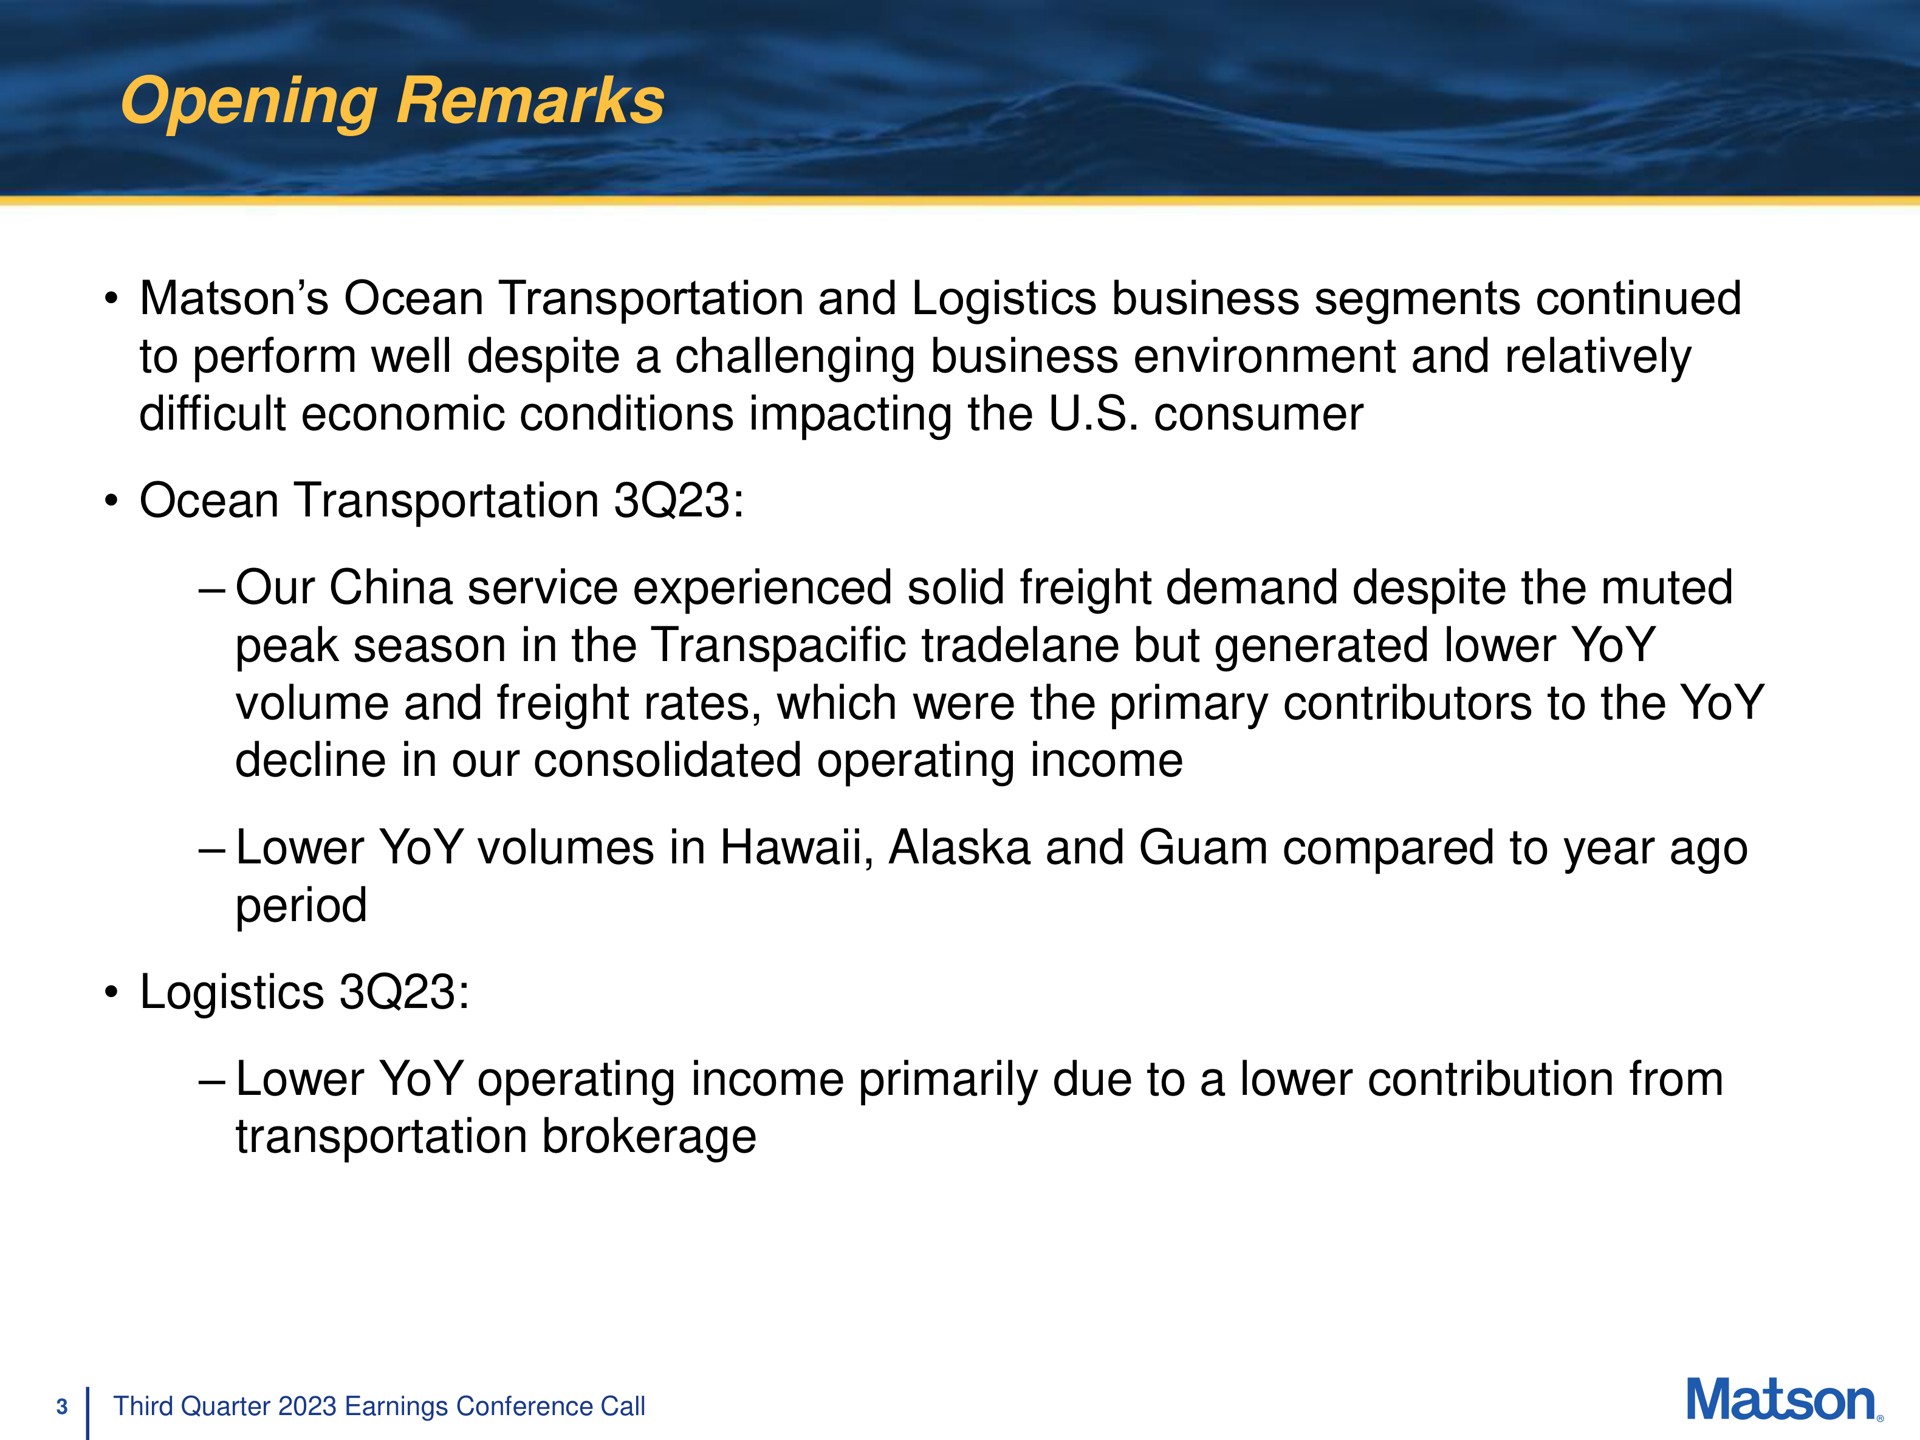 opening remarks ocean transportation and logistics business segments continued to perform well despite a challenging business environment and relatively difficult economic conditions impacting the consumer ocean transportation our china service experienced solid freight demand despite the muted peak season in the transpacific but generated lower yoy volume and freight rates which were the primary contributors to the yoy decline in our consolidated operating income lower yoy volumes in and compared to year ago period logistics lower yoy operating income primarily due to a lower contribution from transportation brokerage | Matson